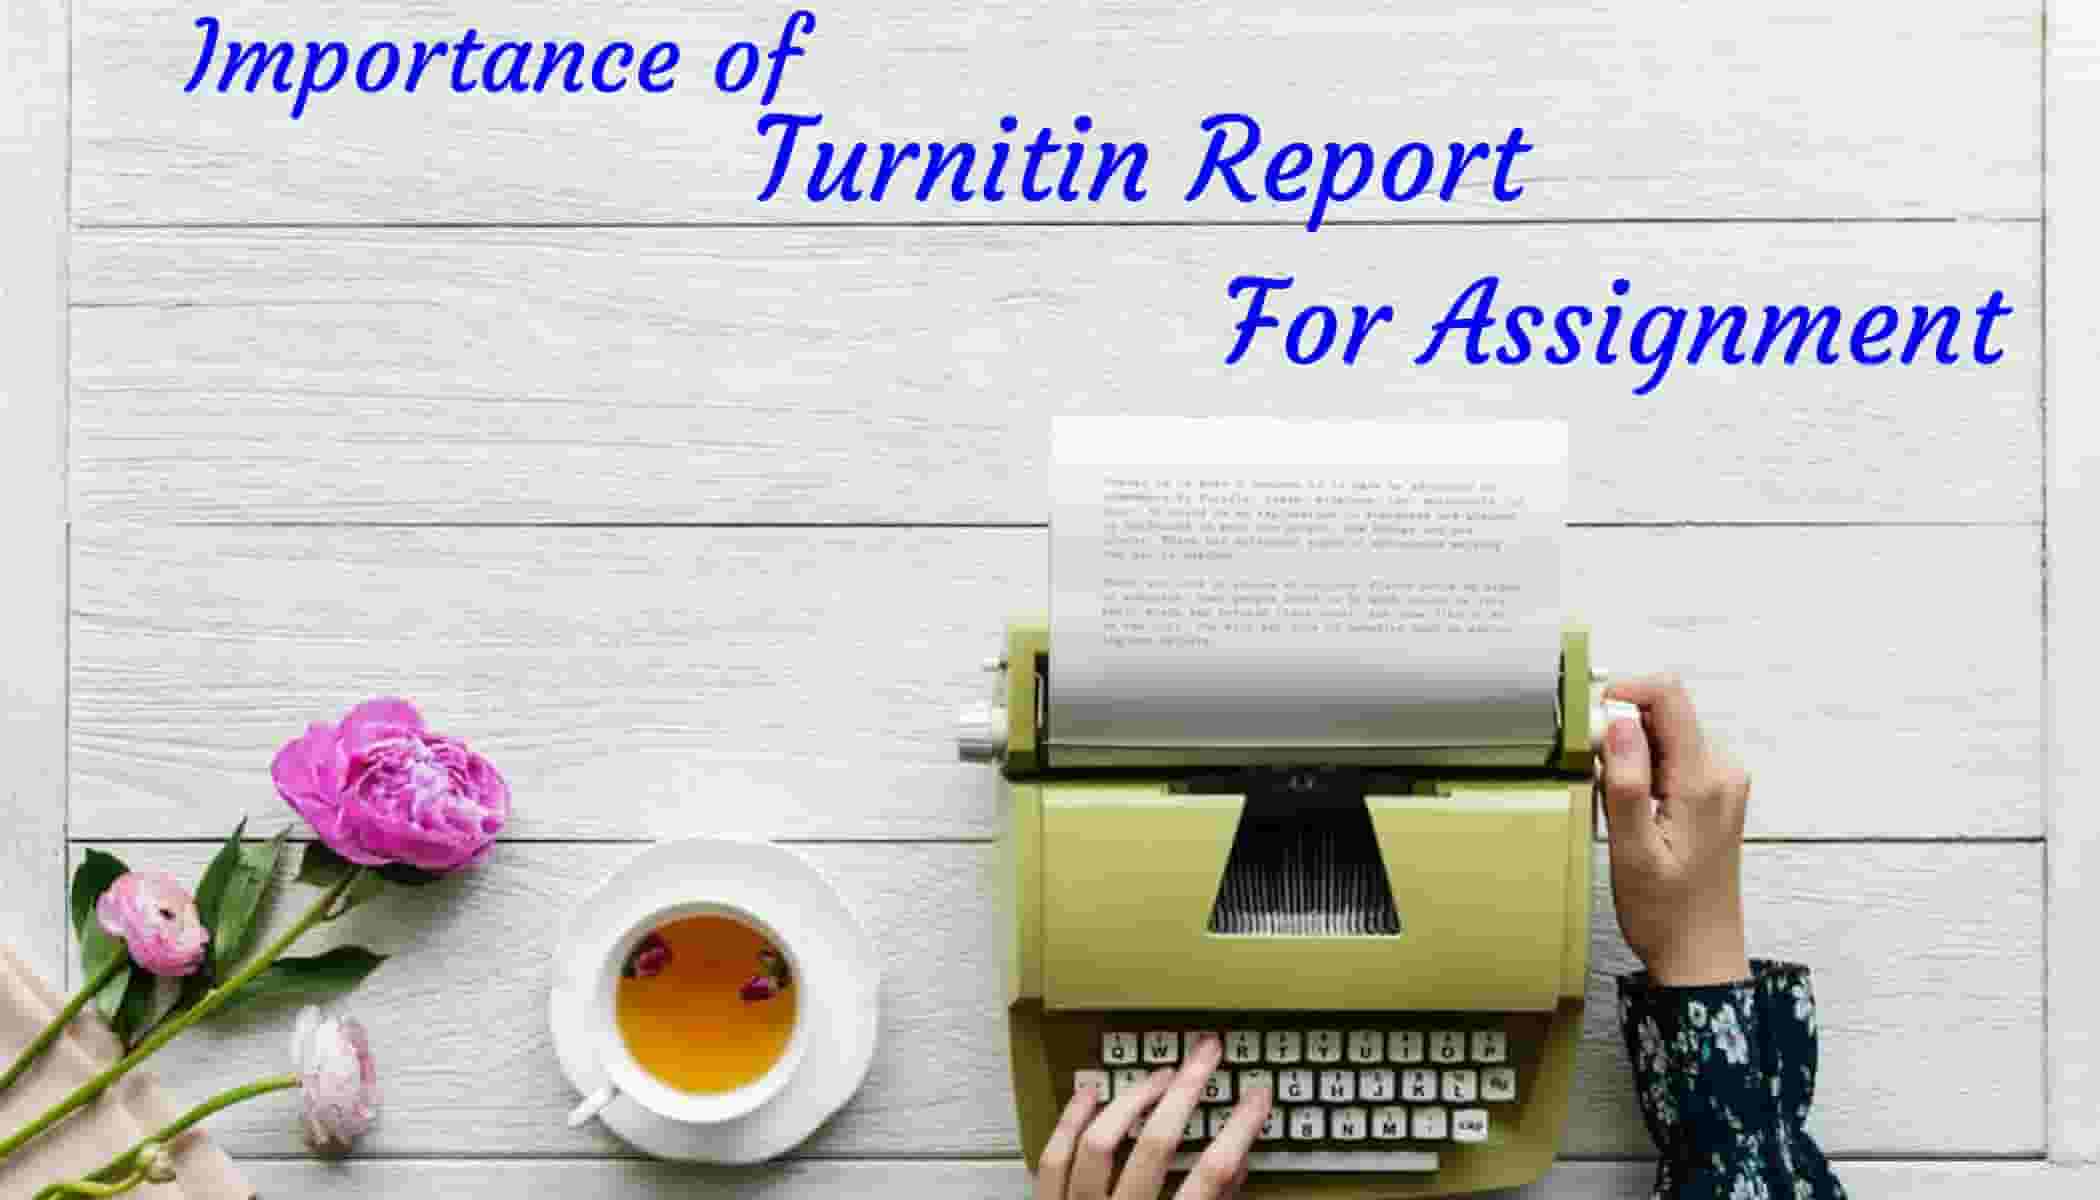 Importance of turnitin report